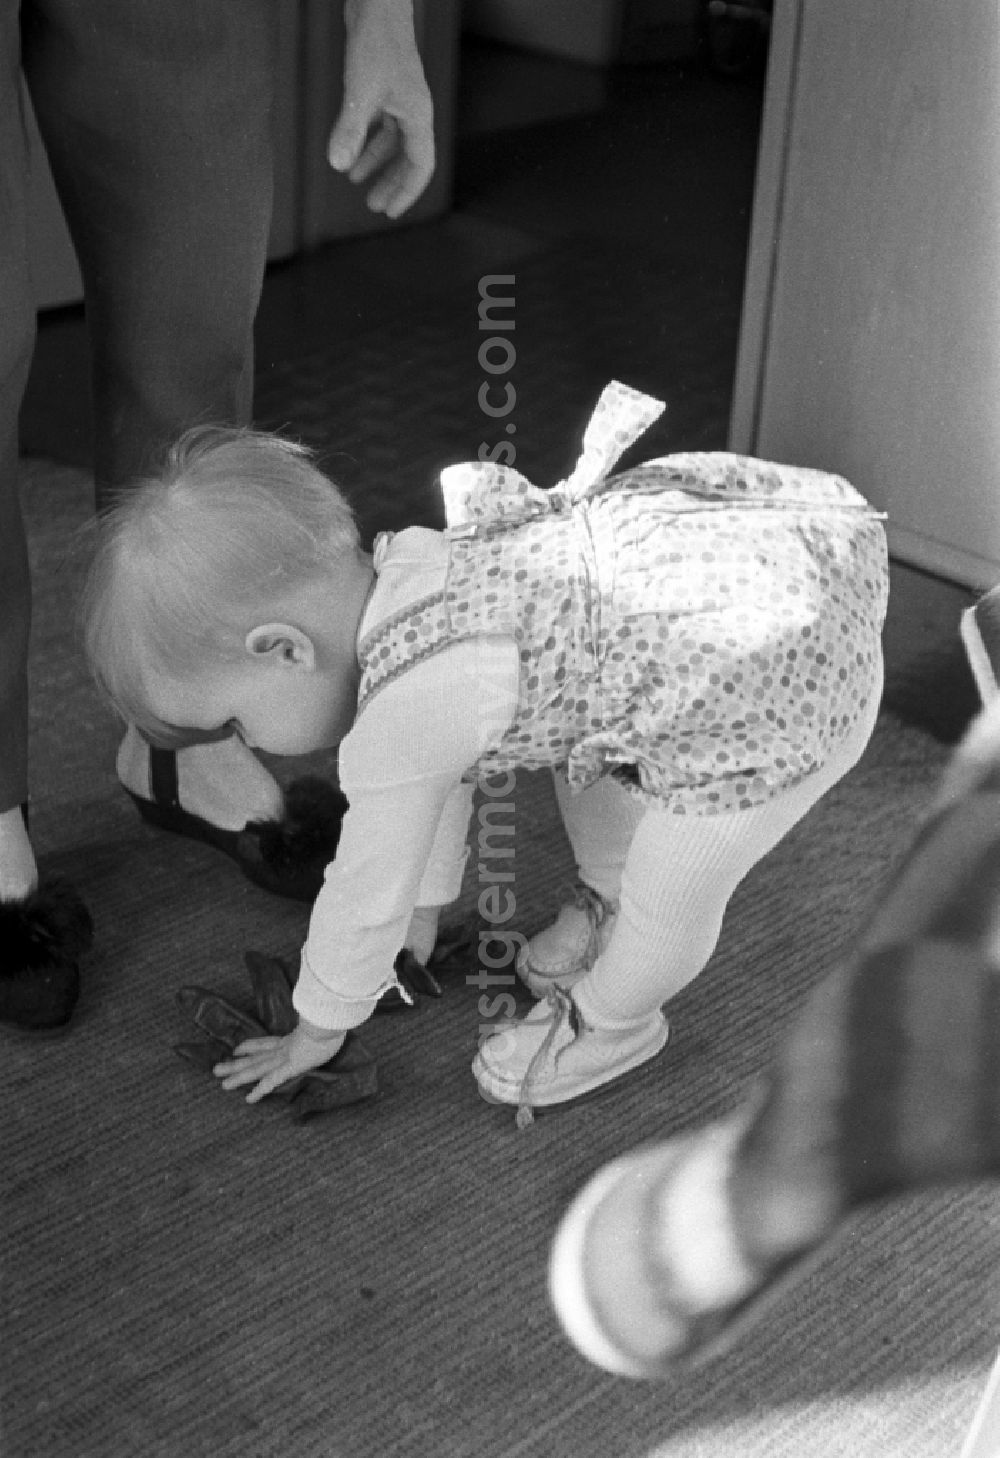 GDR picture archive: Berlin - Friedrichshain - A small child at home while playing in Berlin - Friedrichshain